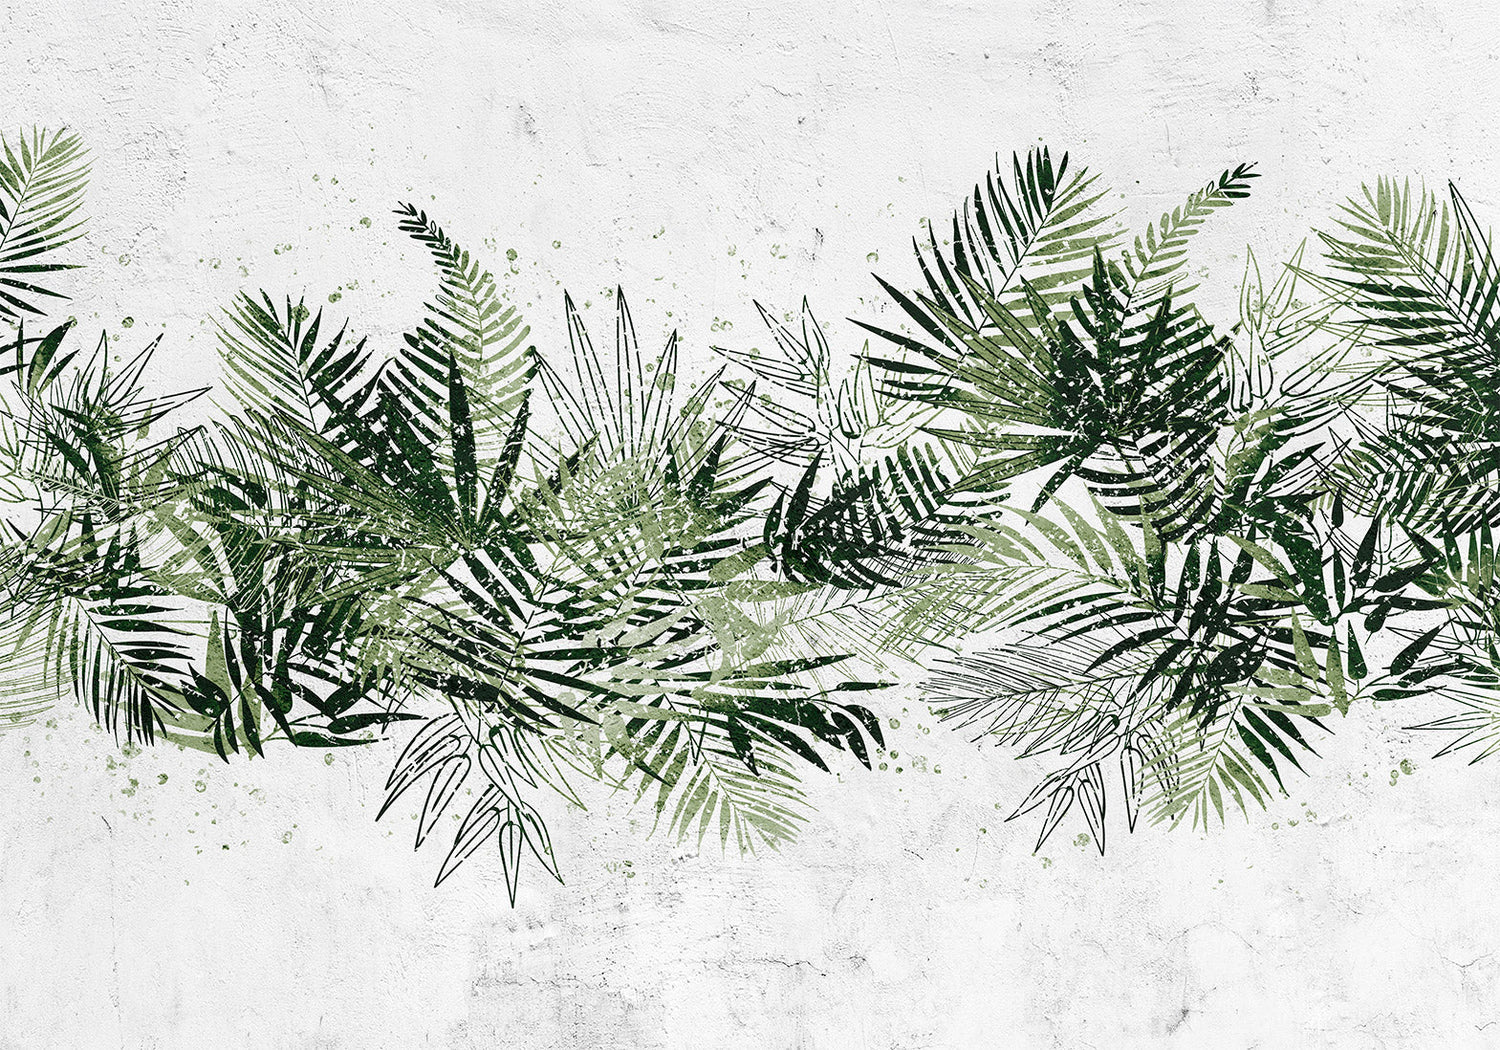 Peel & Stick Botanical Wall Mural - Jungle Tropical Leaves - Removable Wallpaper